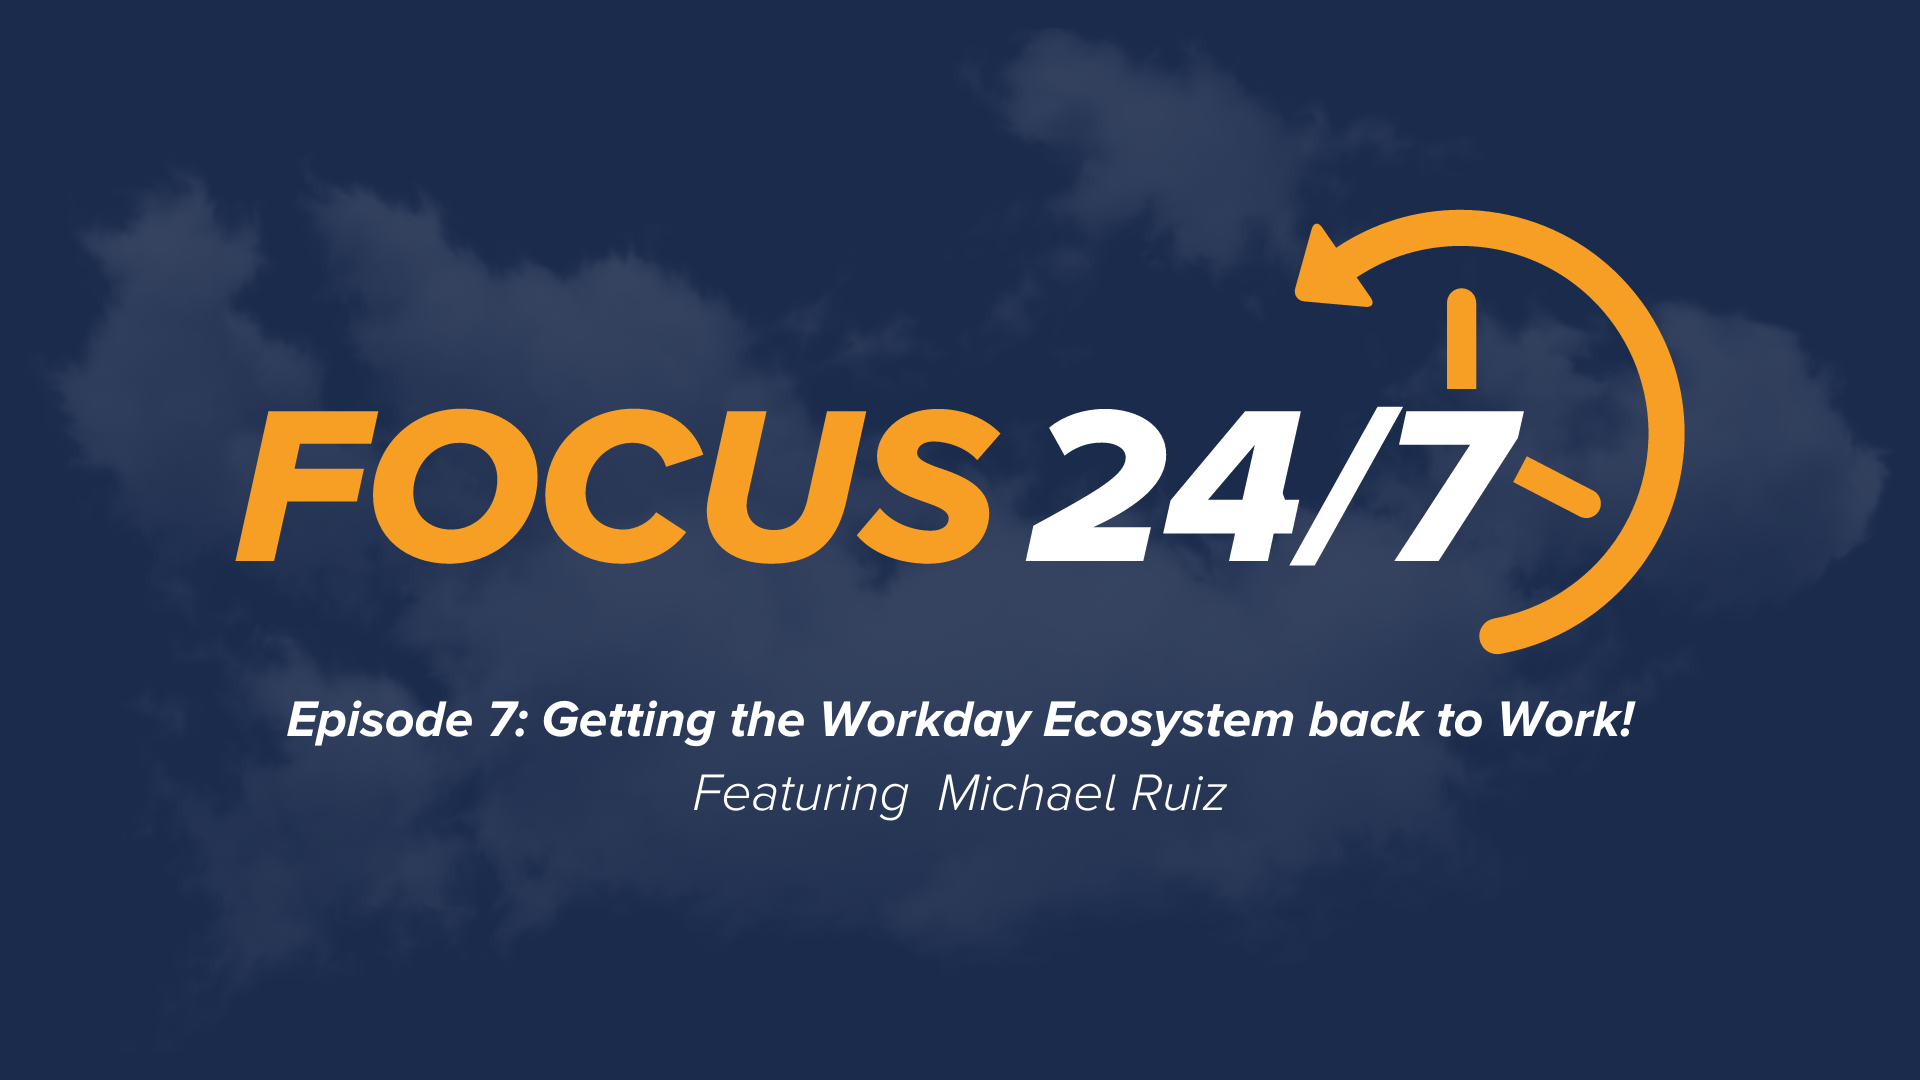 Focus 24/7 | Episode #7 | Getting the Workday Ecosystem back to Work!